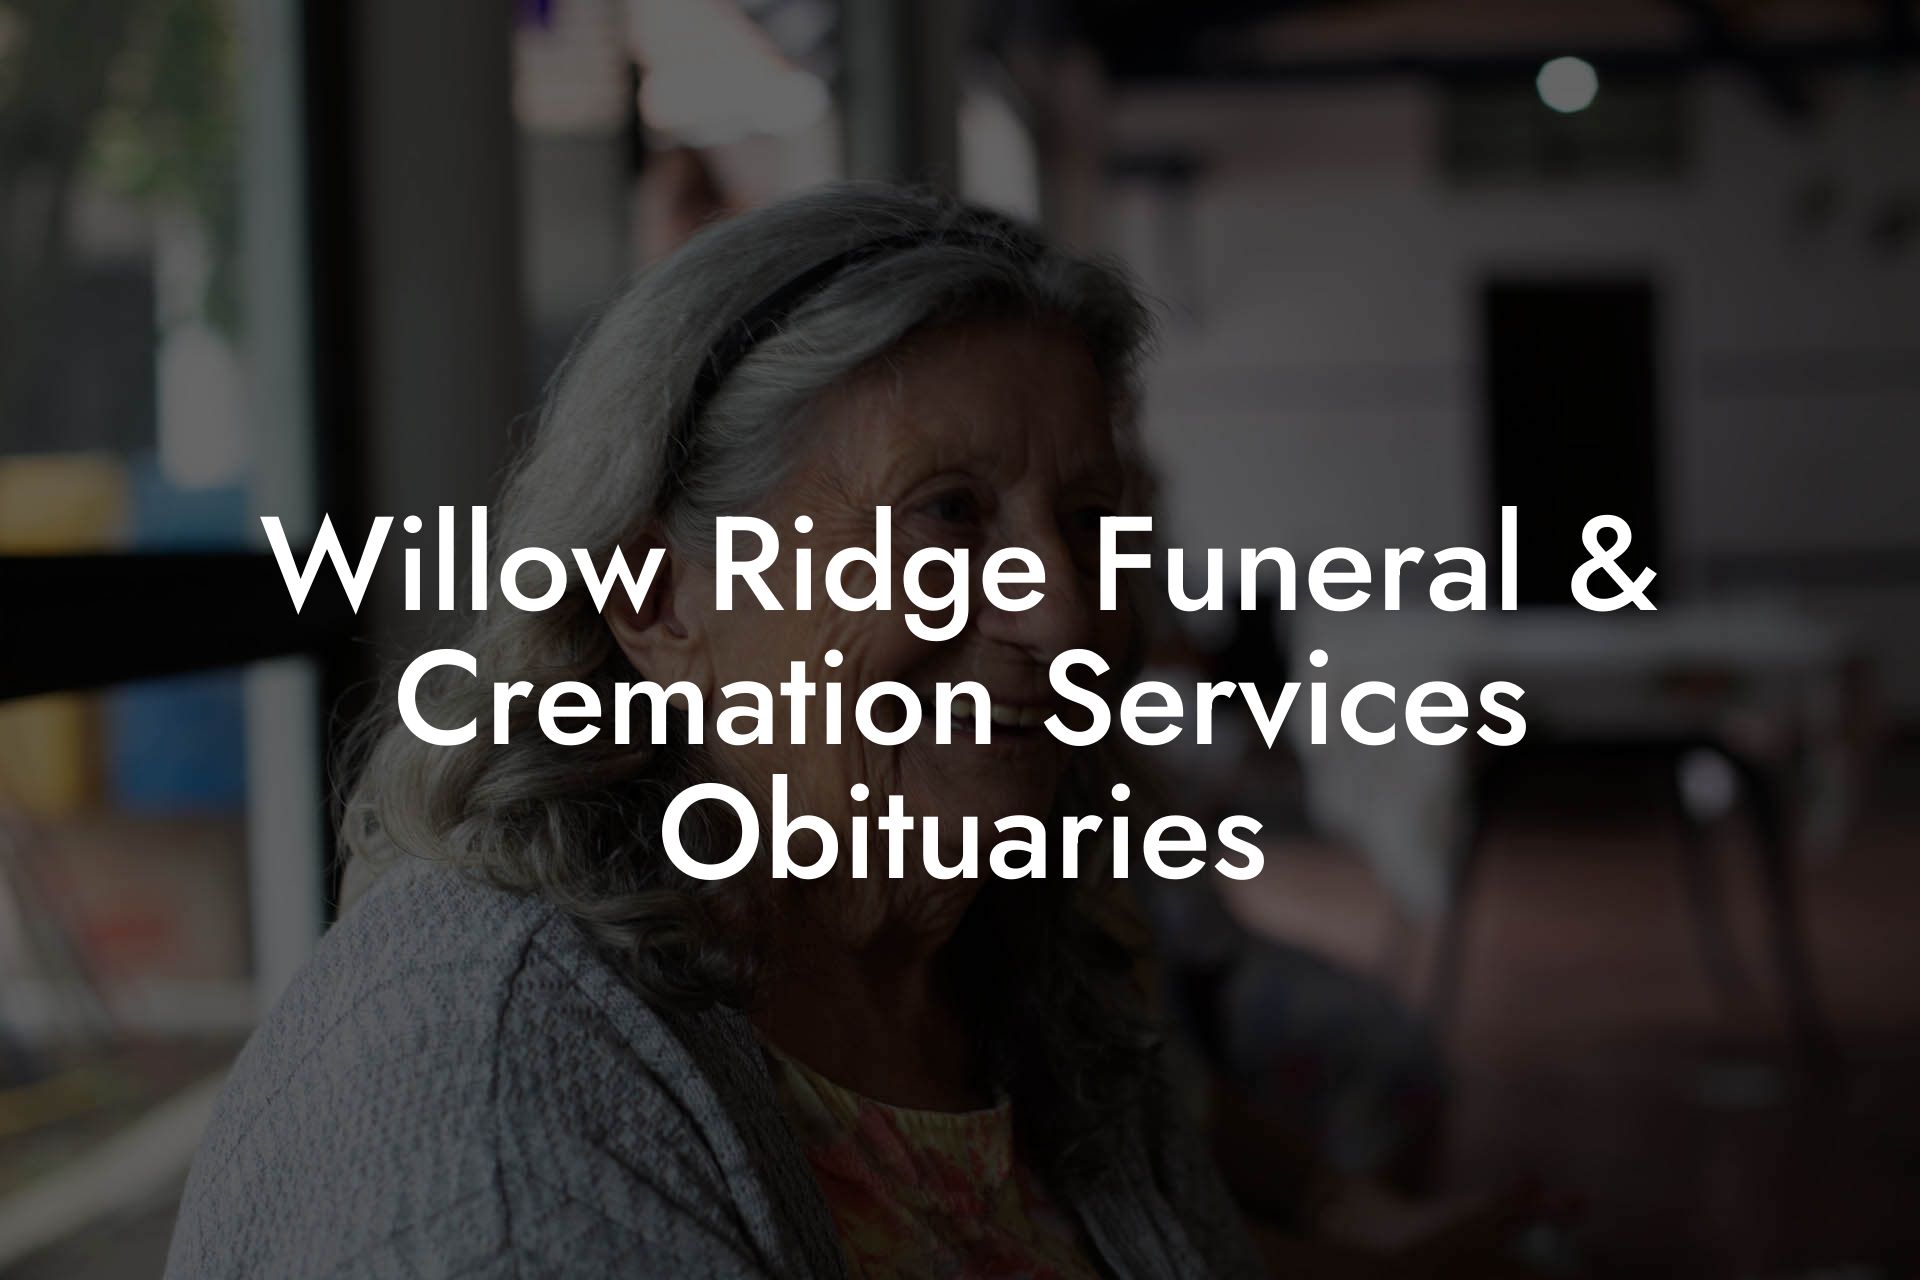 Willow Ridge Funeral & Cremation Services Obituaries - Eulogy Assistant